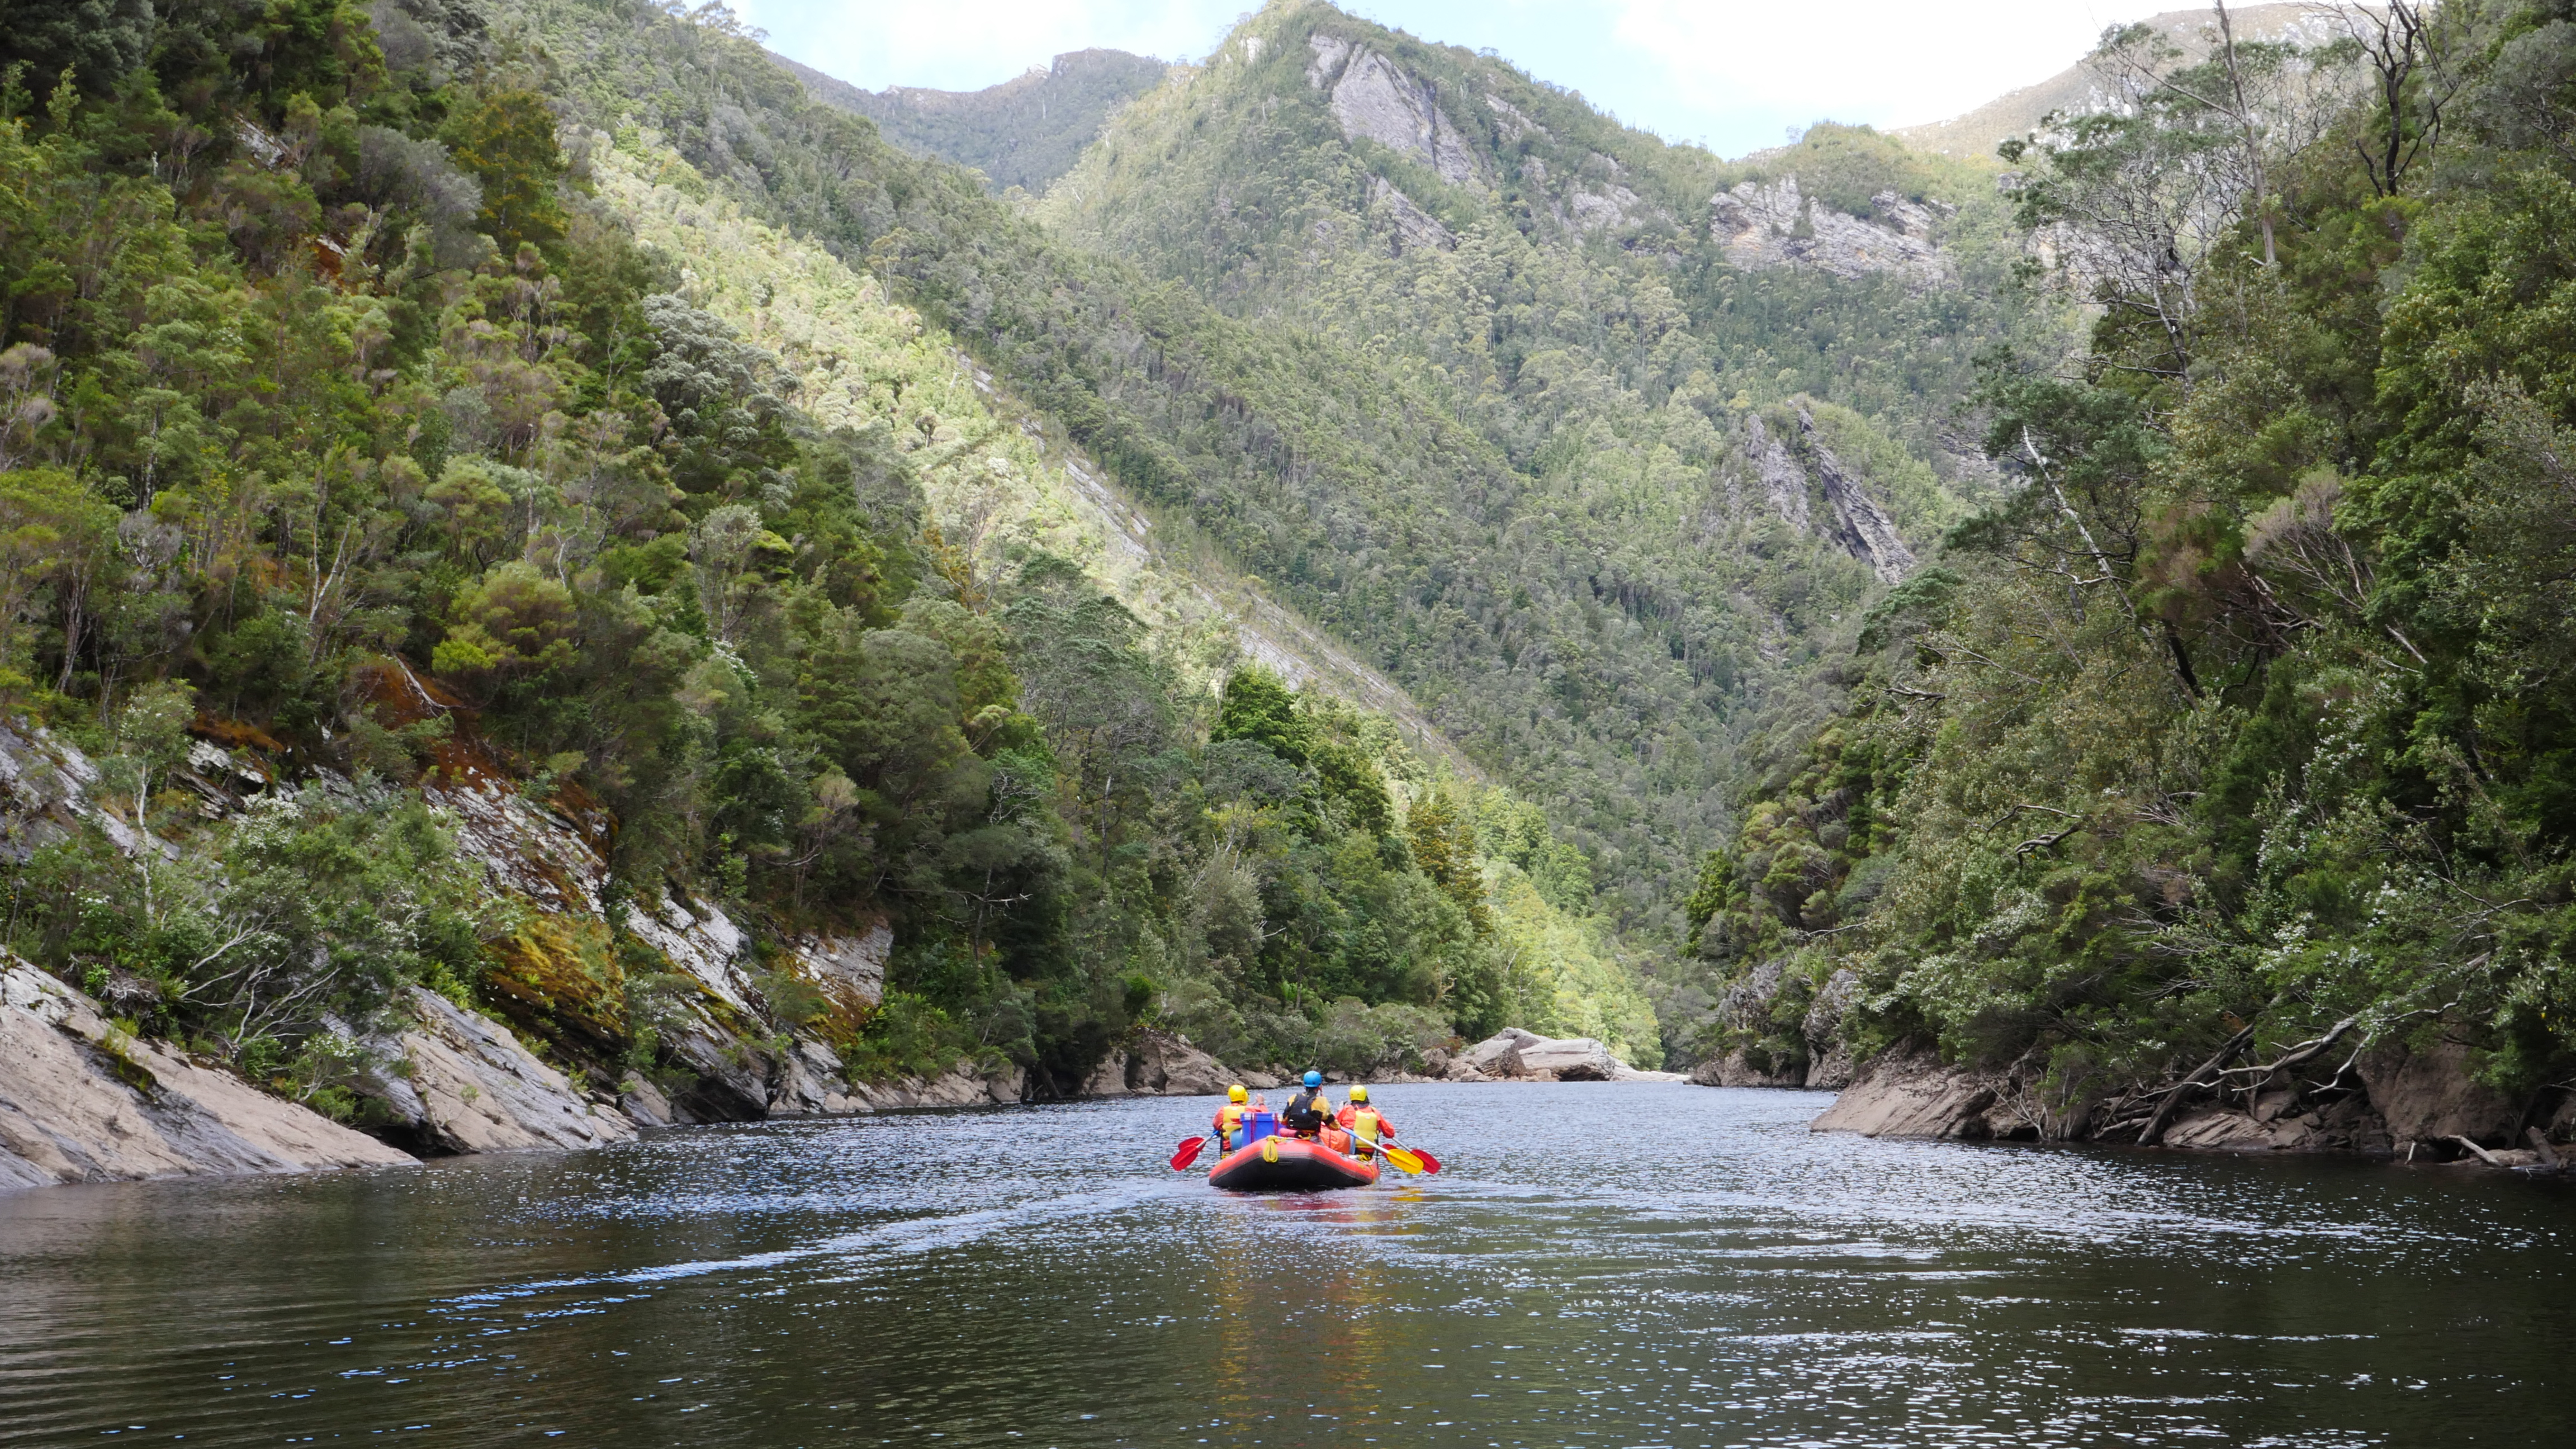 Franklin River Rafting, your trip down the Franklin River